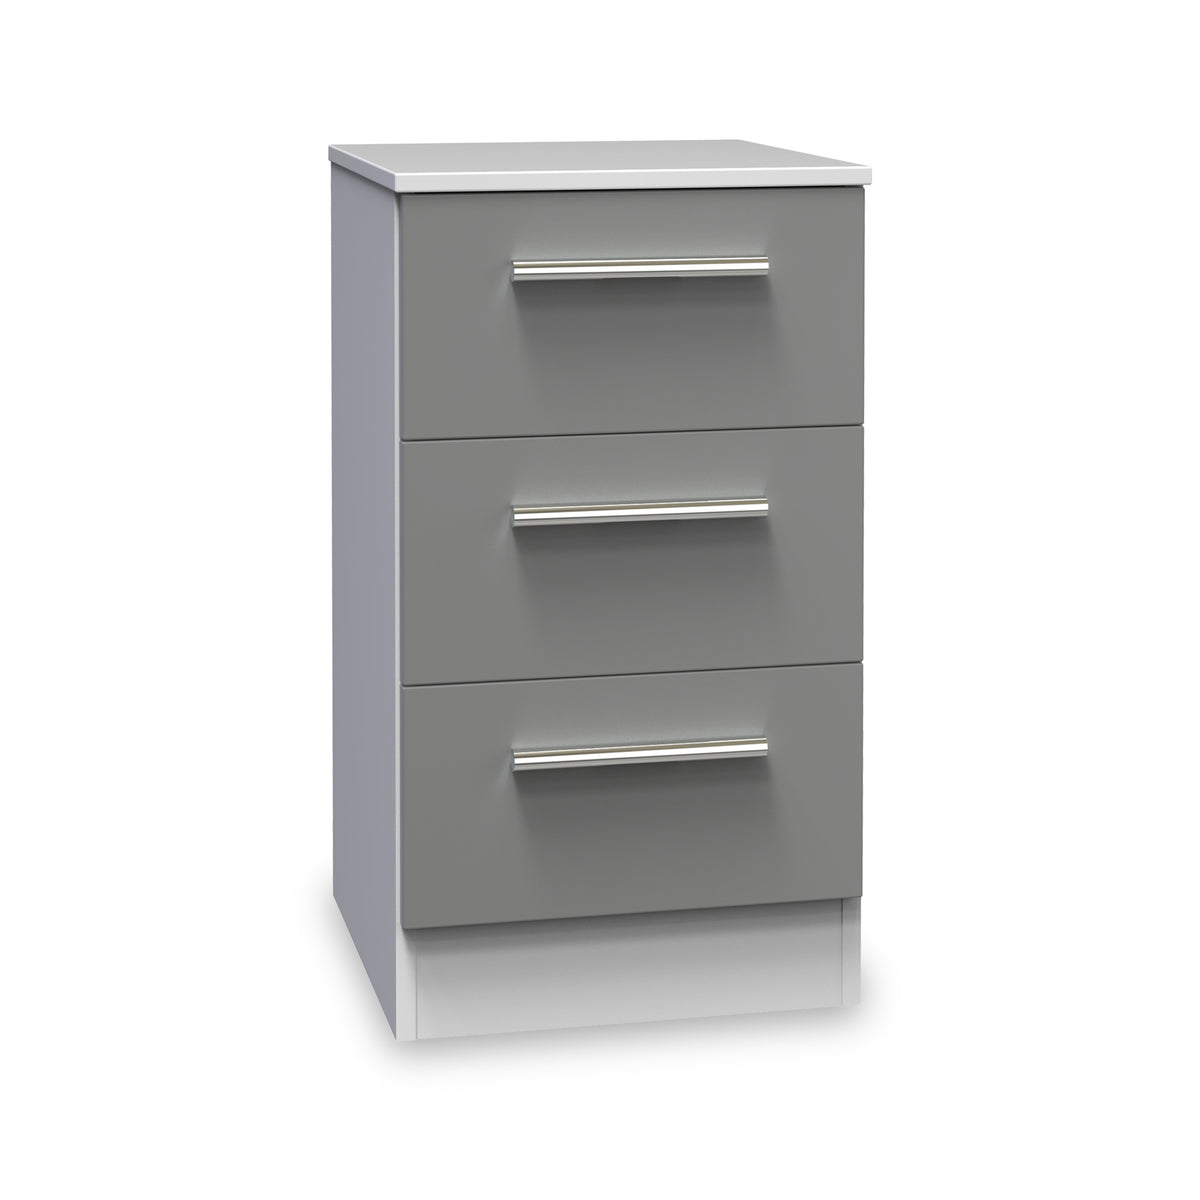 Blakely Grey and White 3 Drawer Bedside Cabinet from roseland